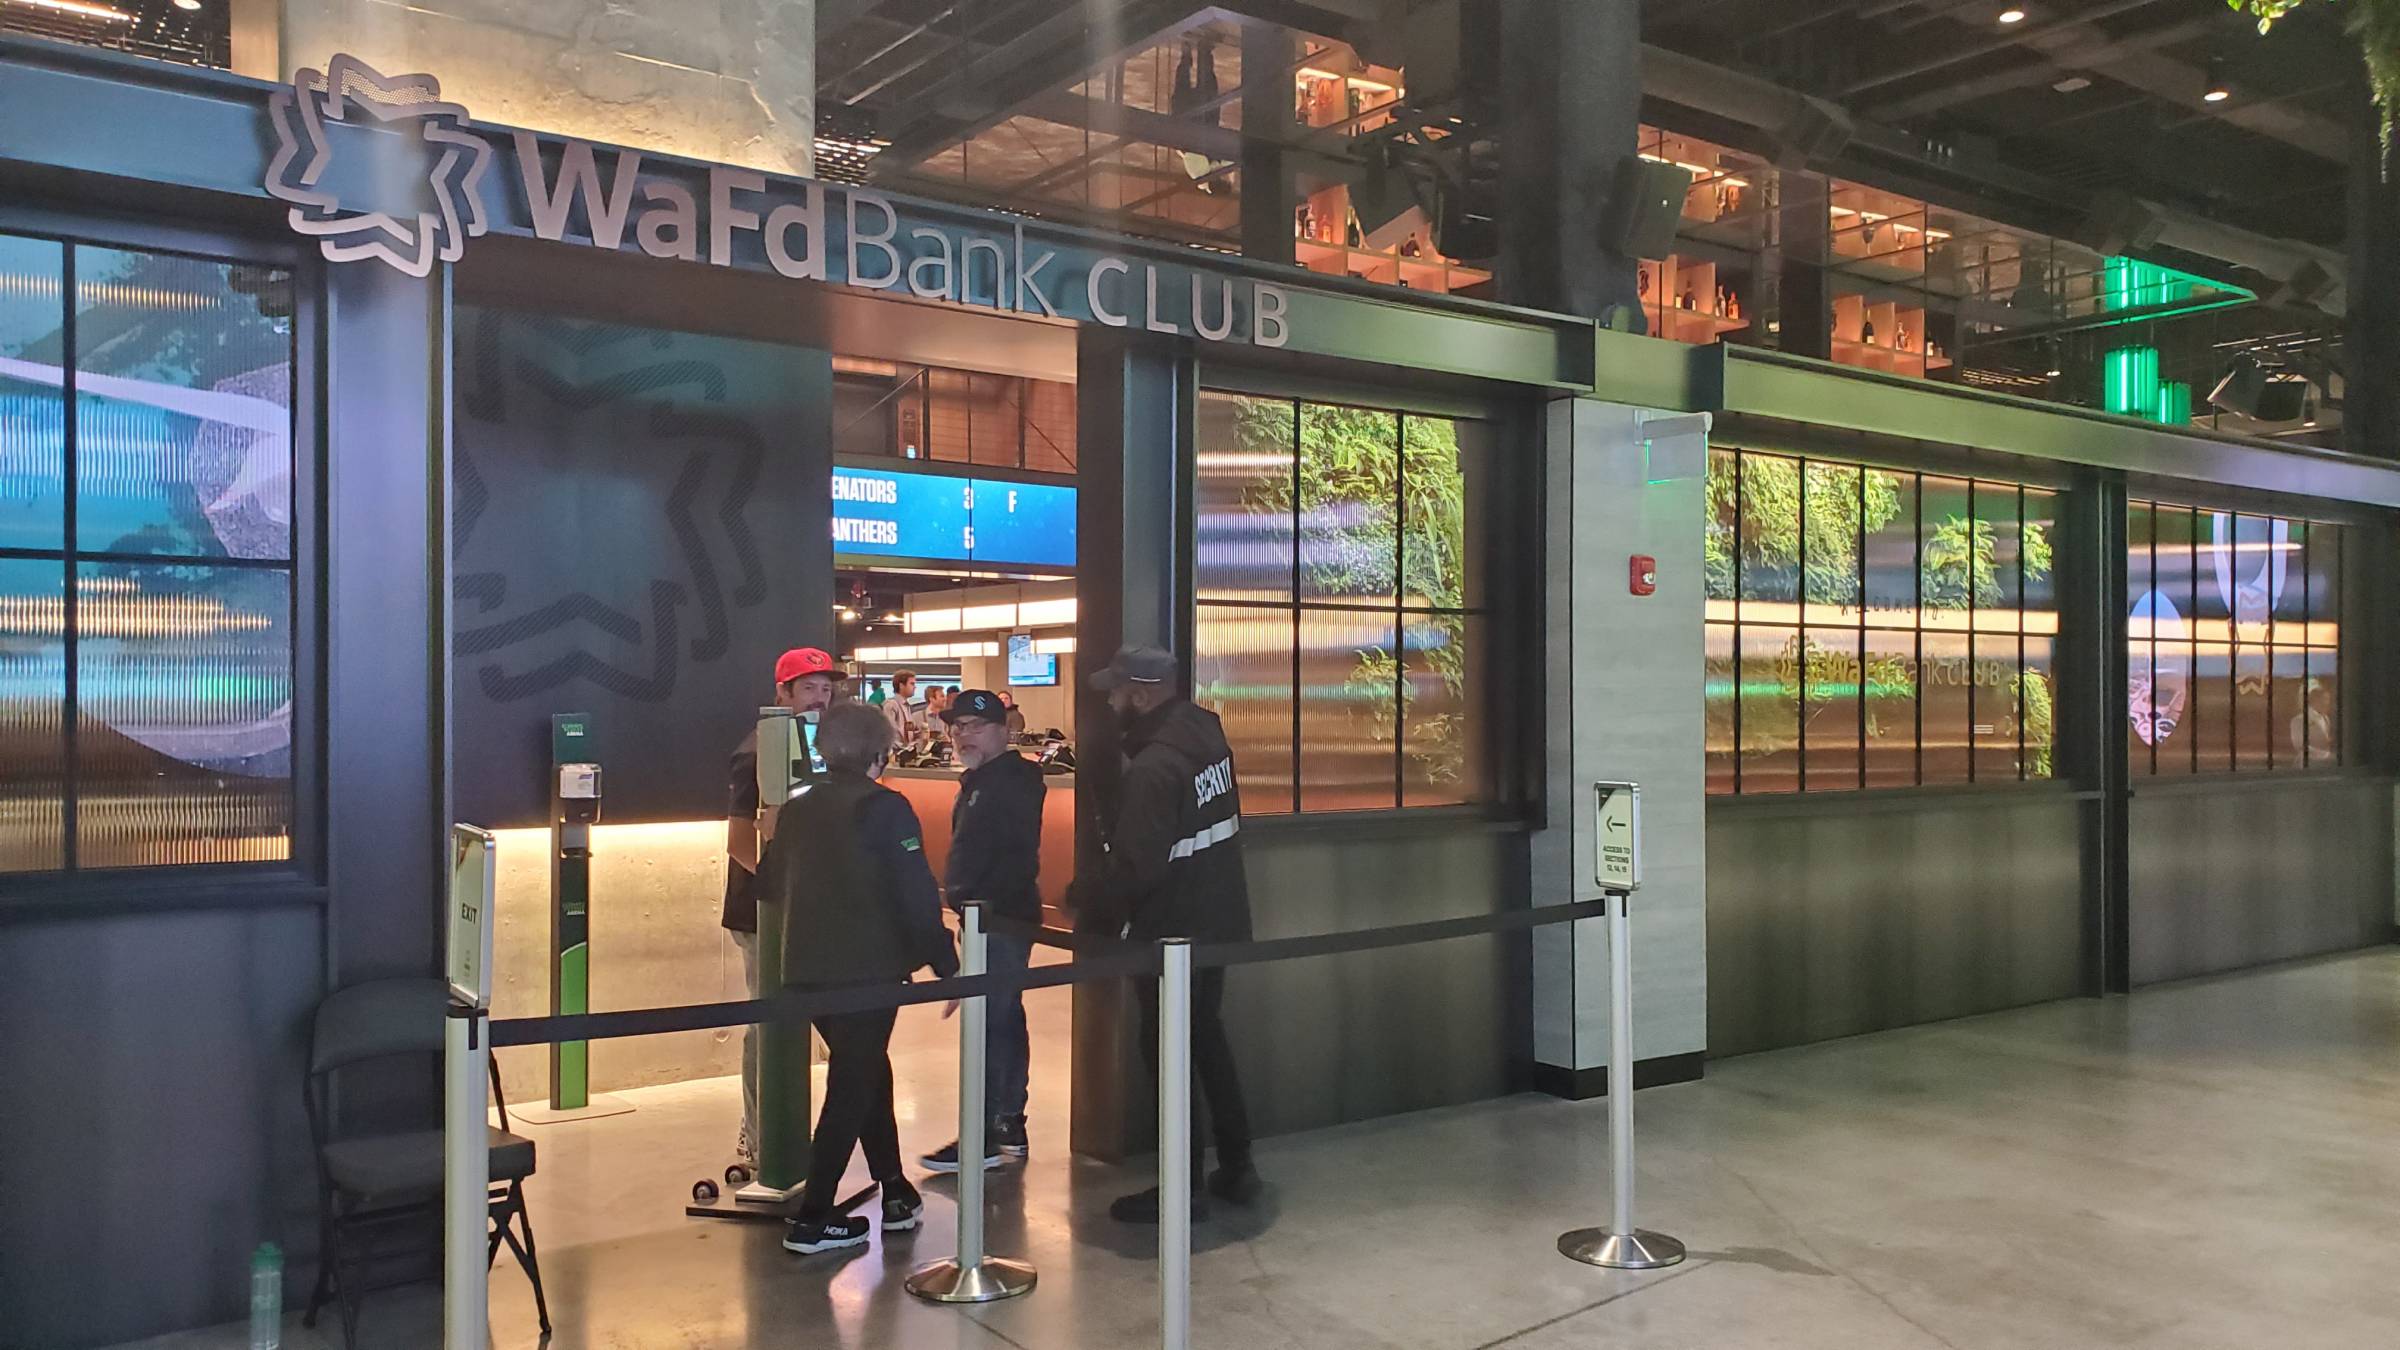 WaFd Bank Club Entrance at Climate Pledge Arena